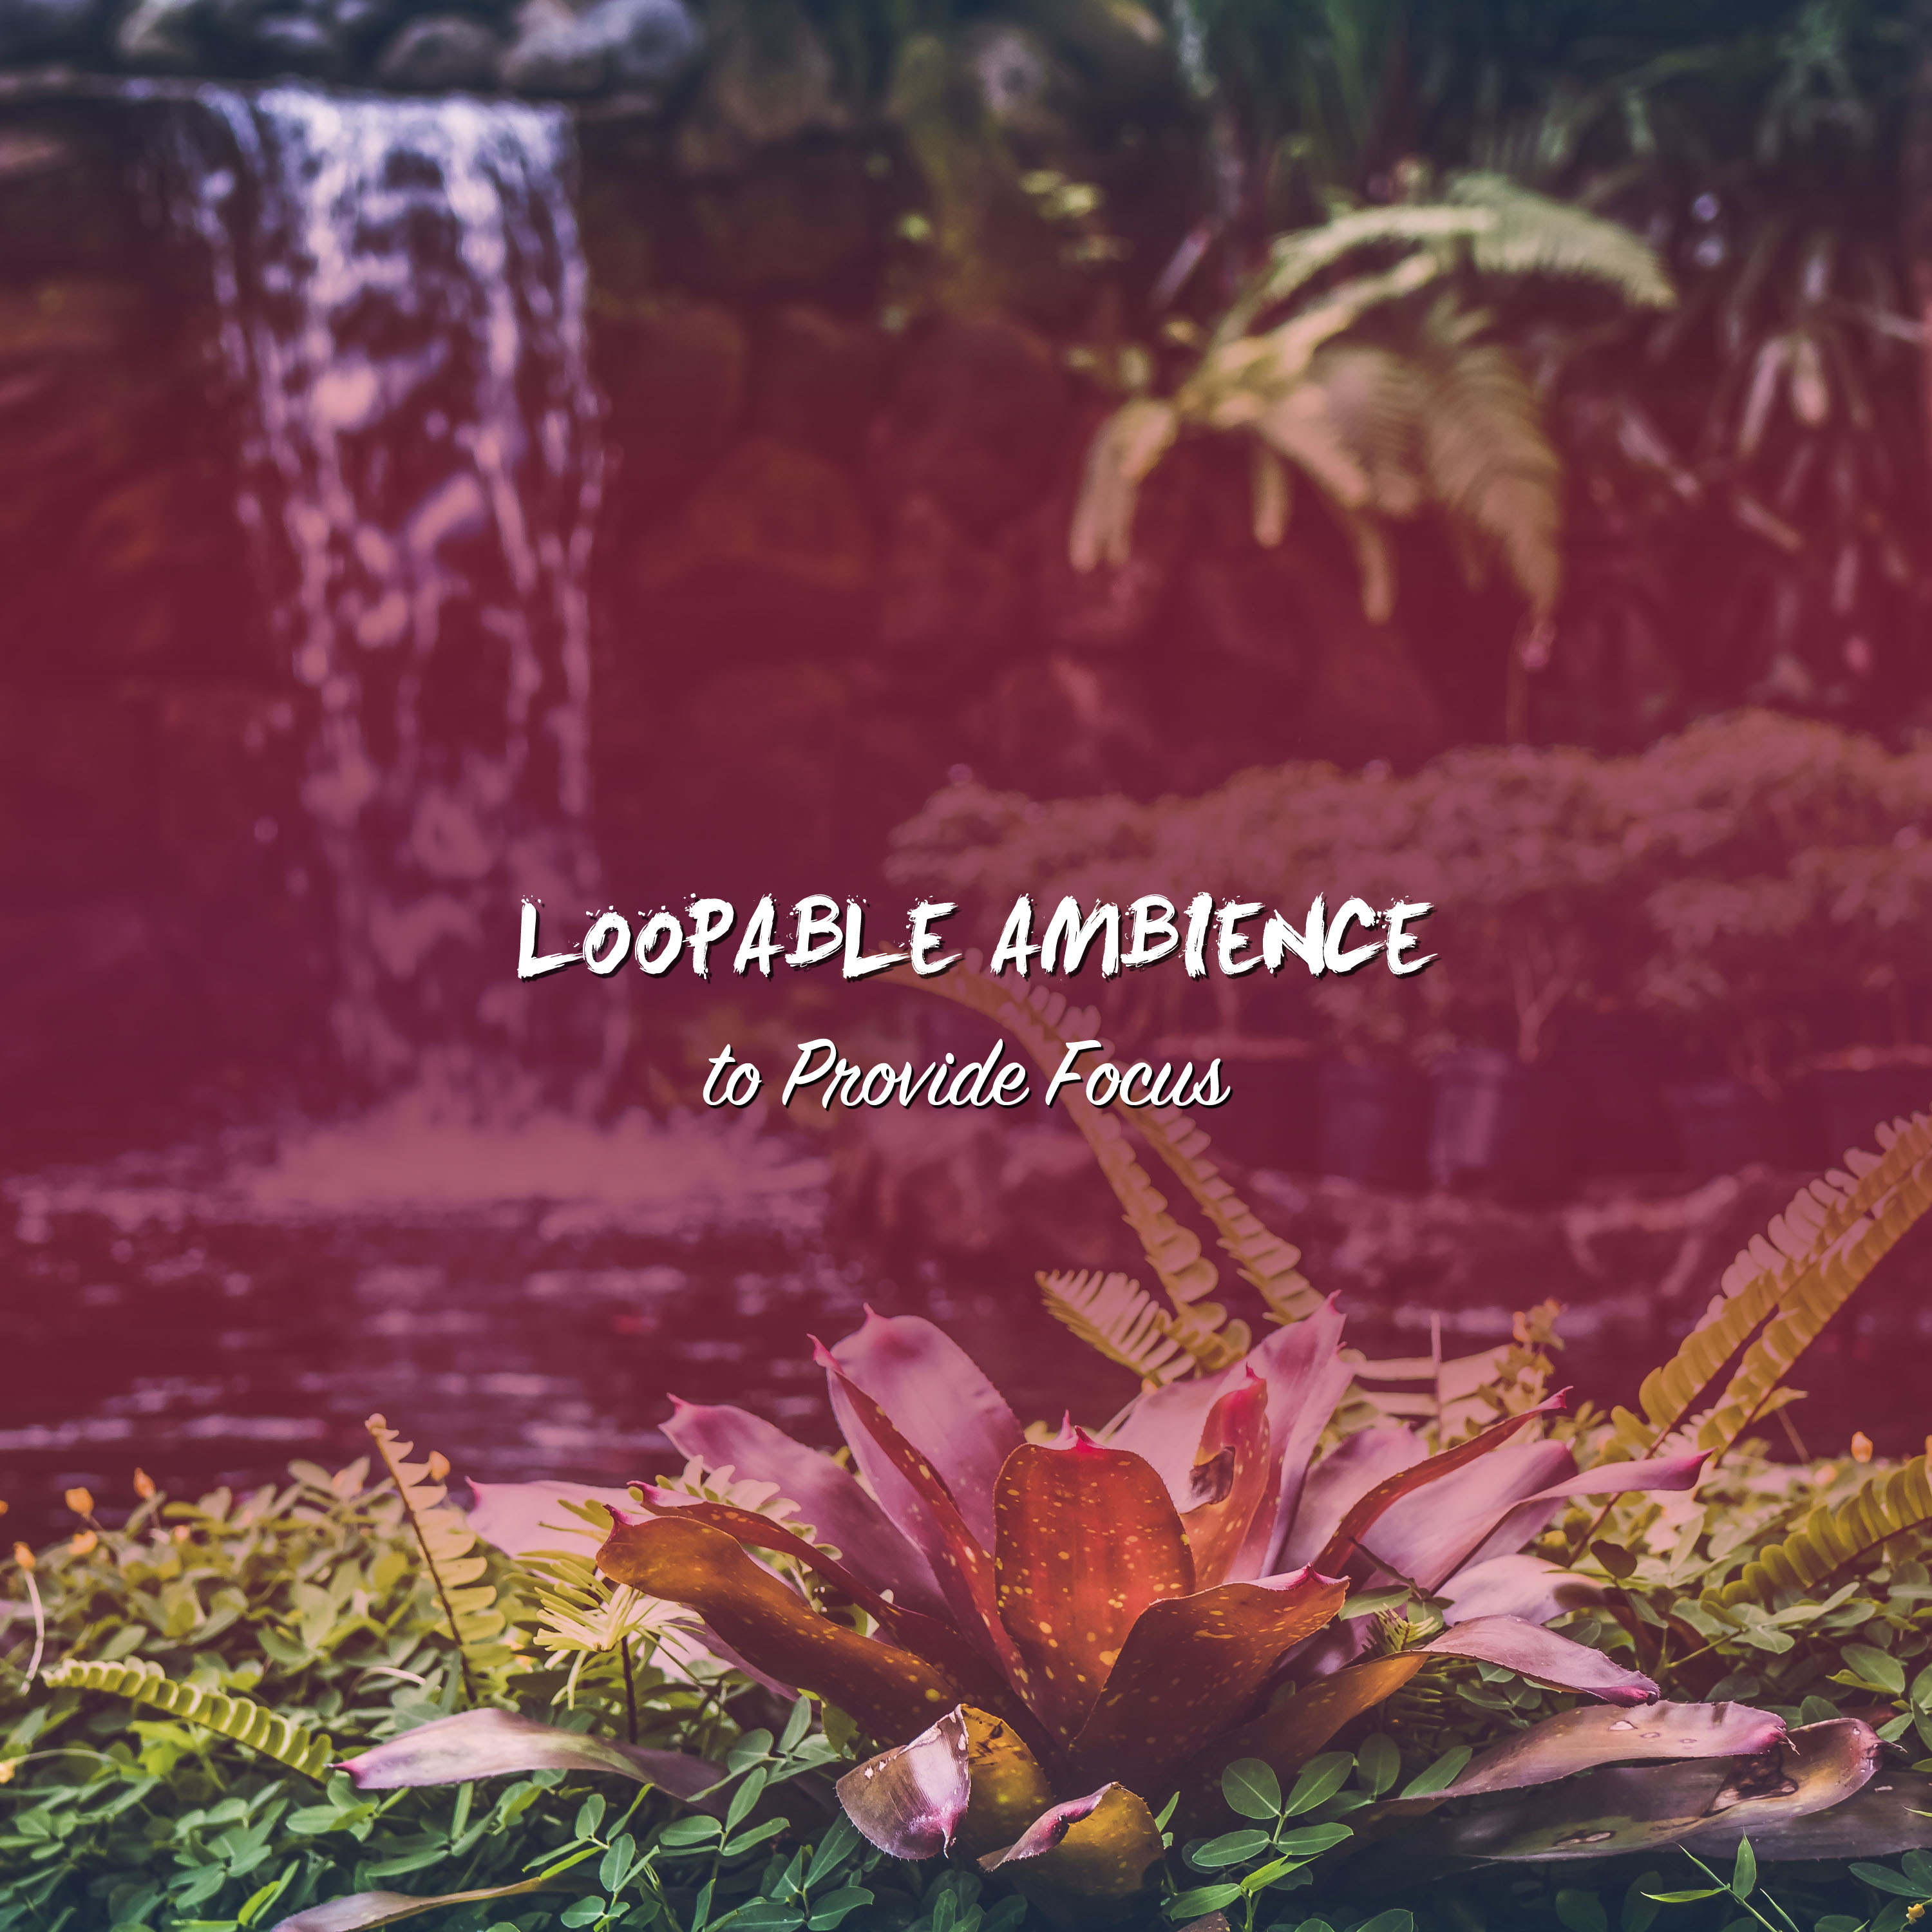 16 Loopable Ambience Noises to Provide Focus